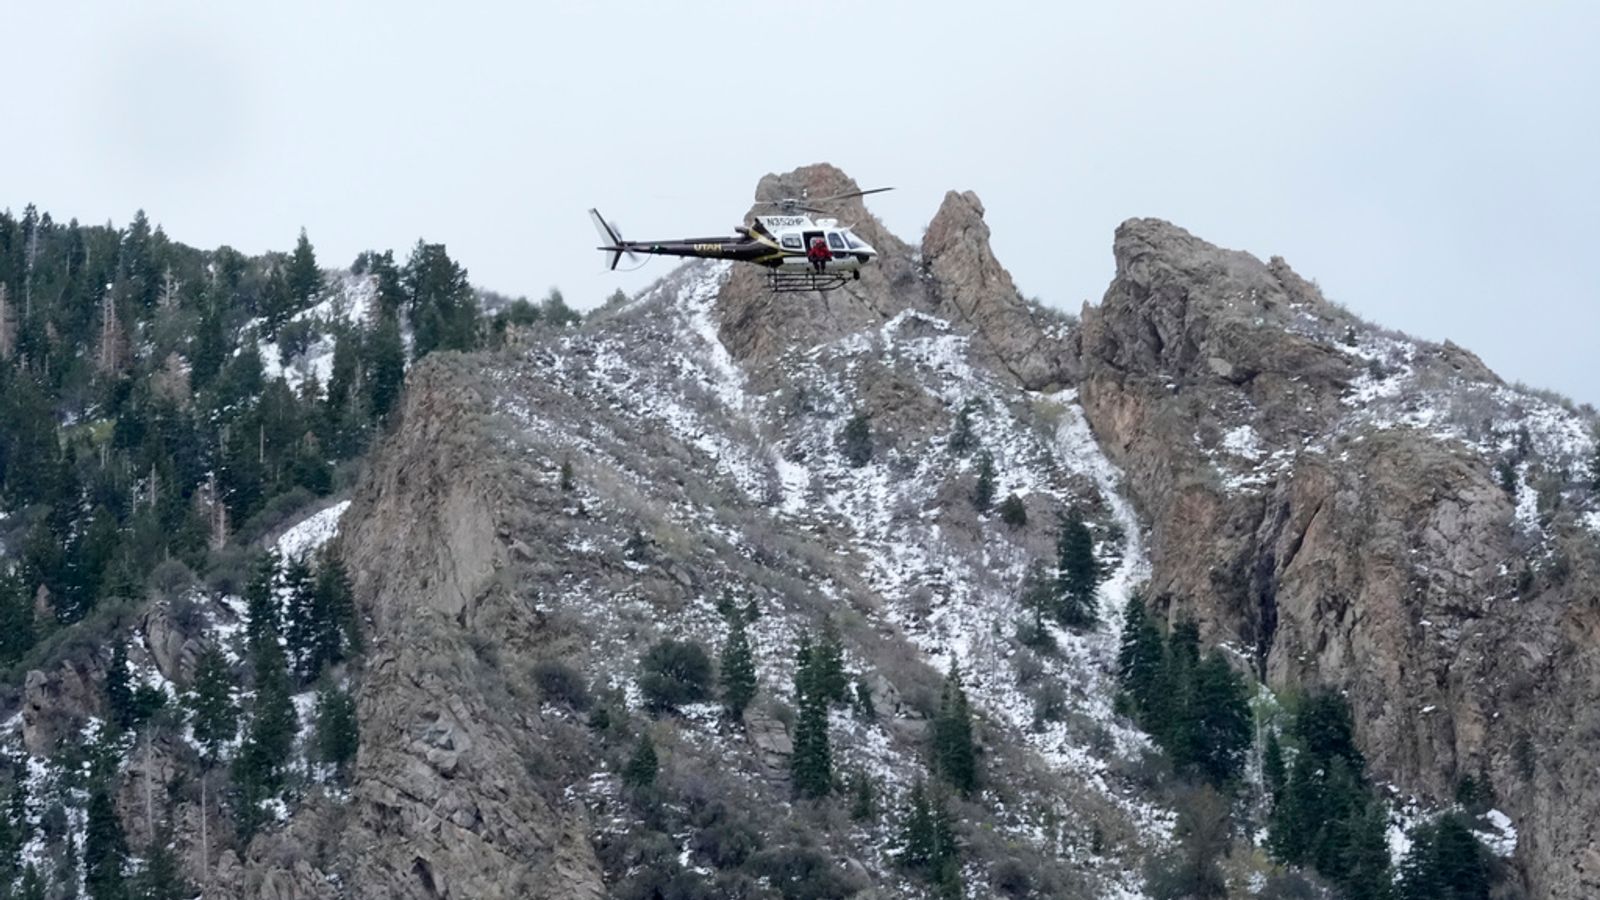 Two skiers killed in avalanche in Utah mountains